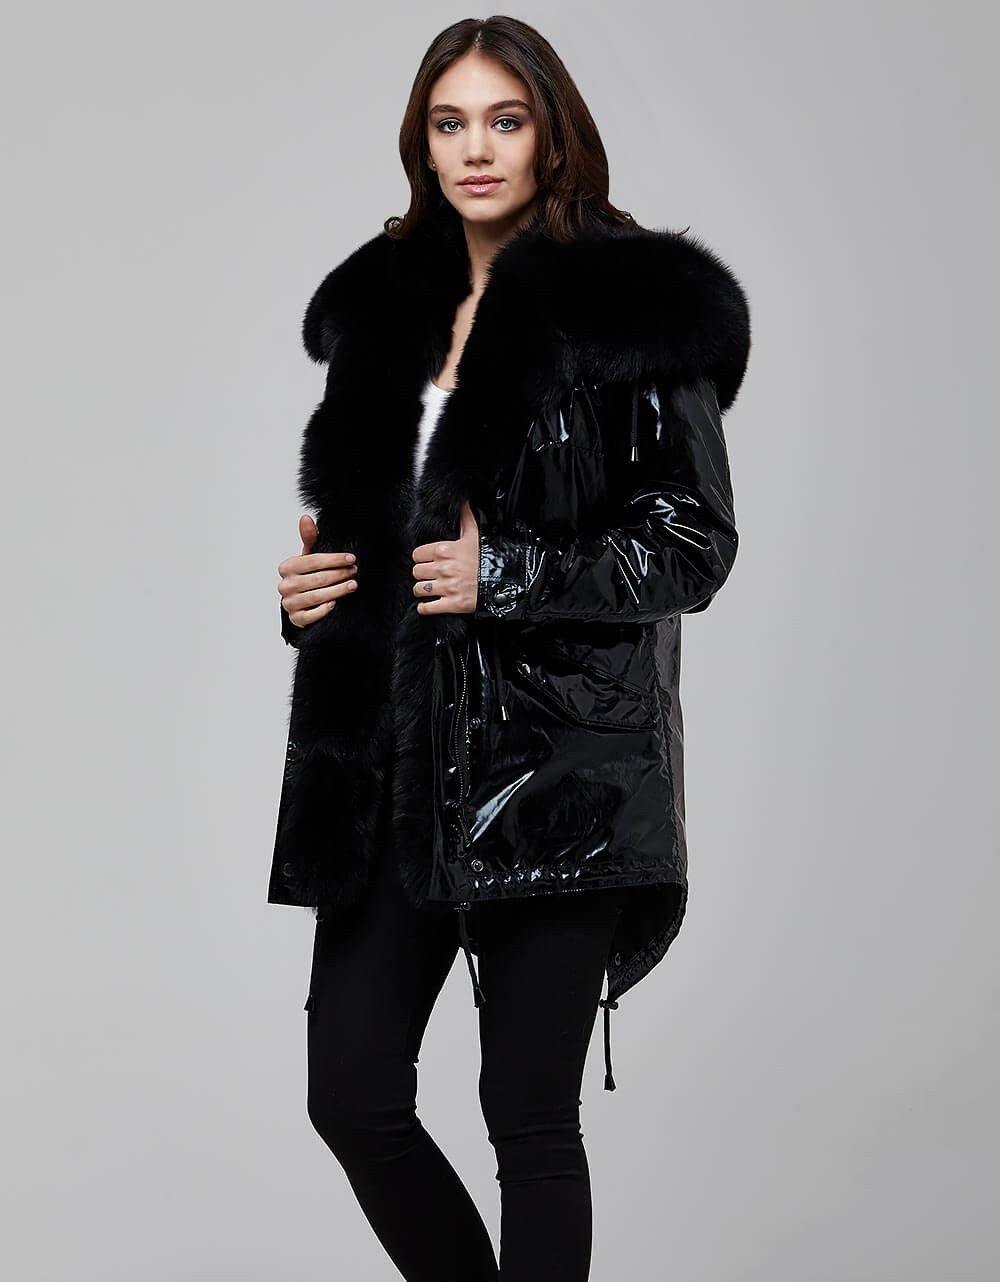 Black Fur Metallic Parka - For you and all